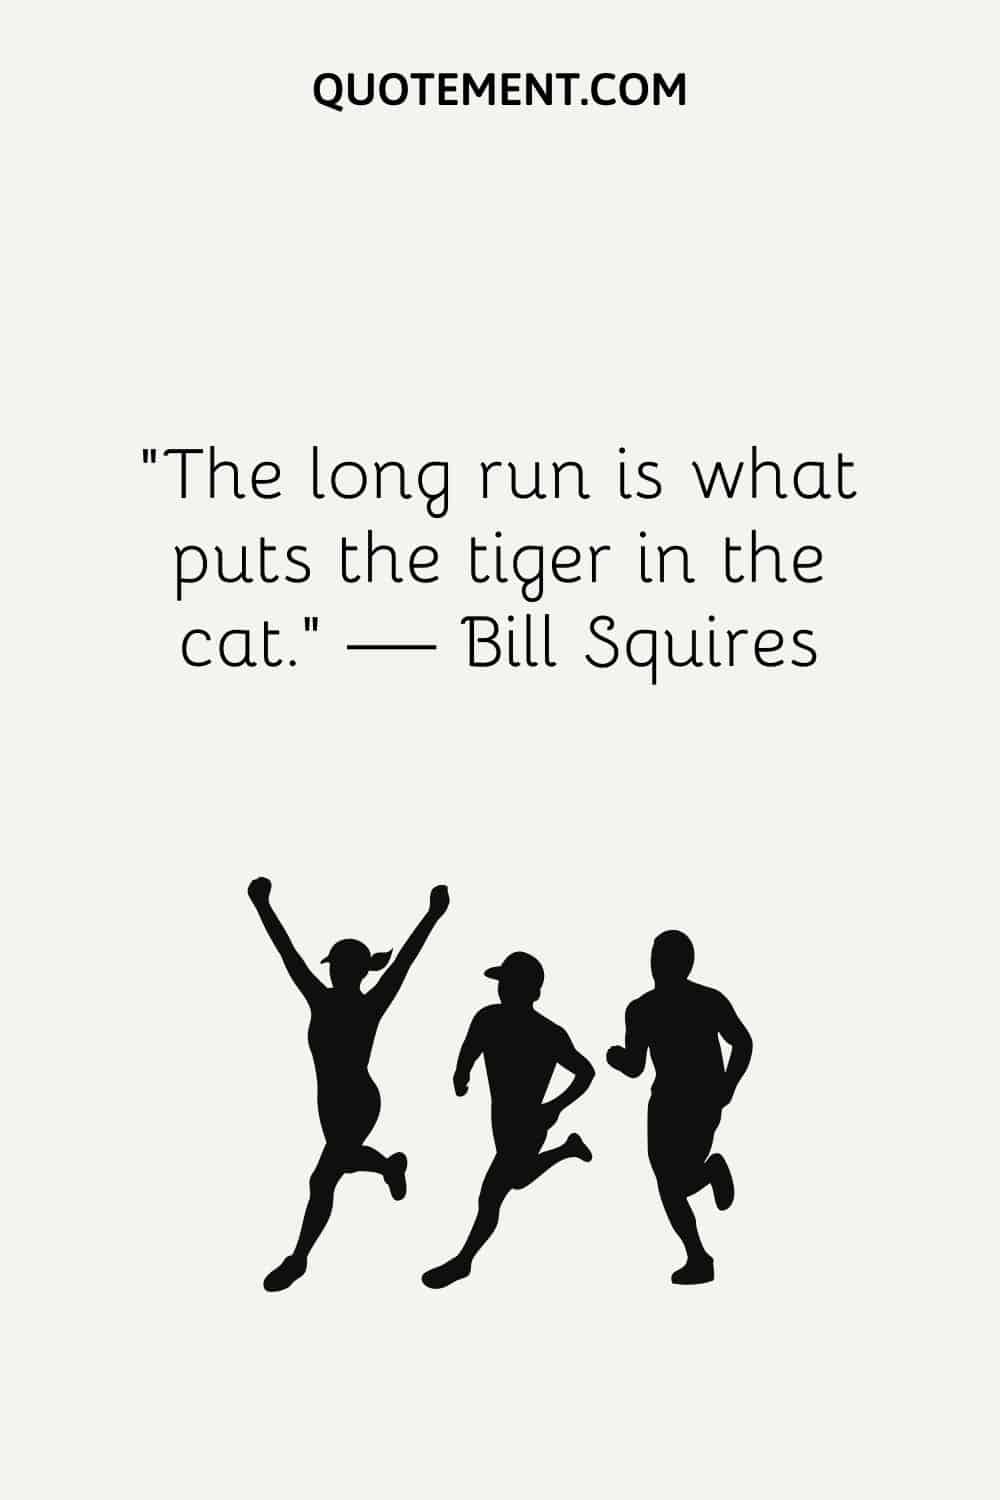 The long run is what puts the tiger in the cat